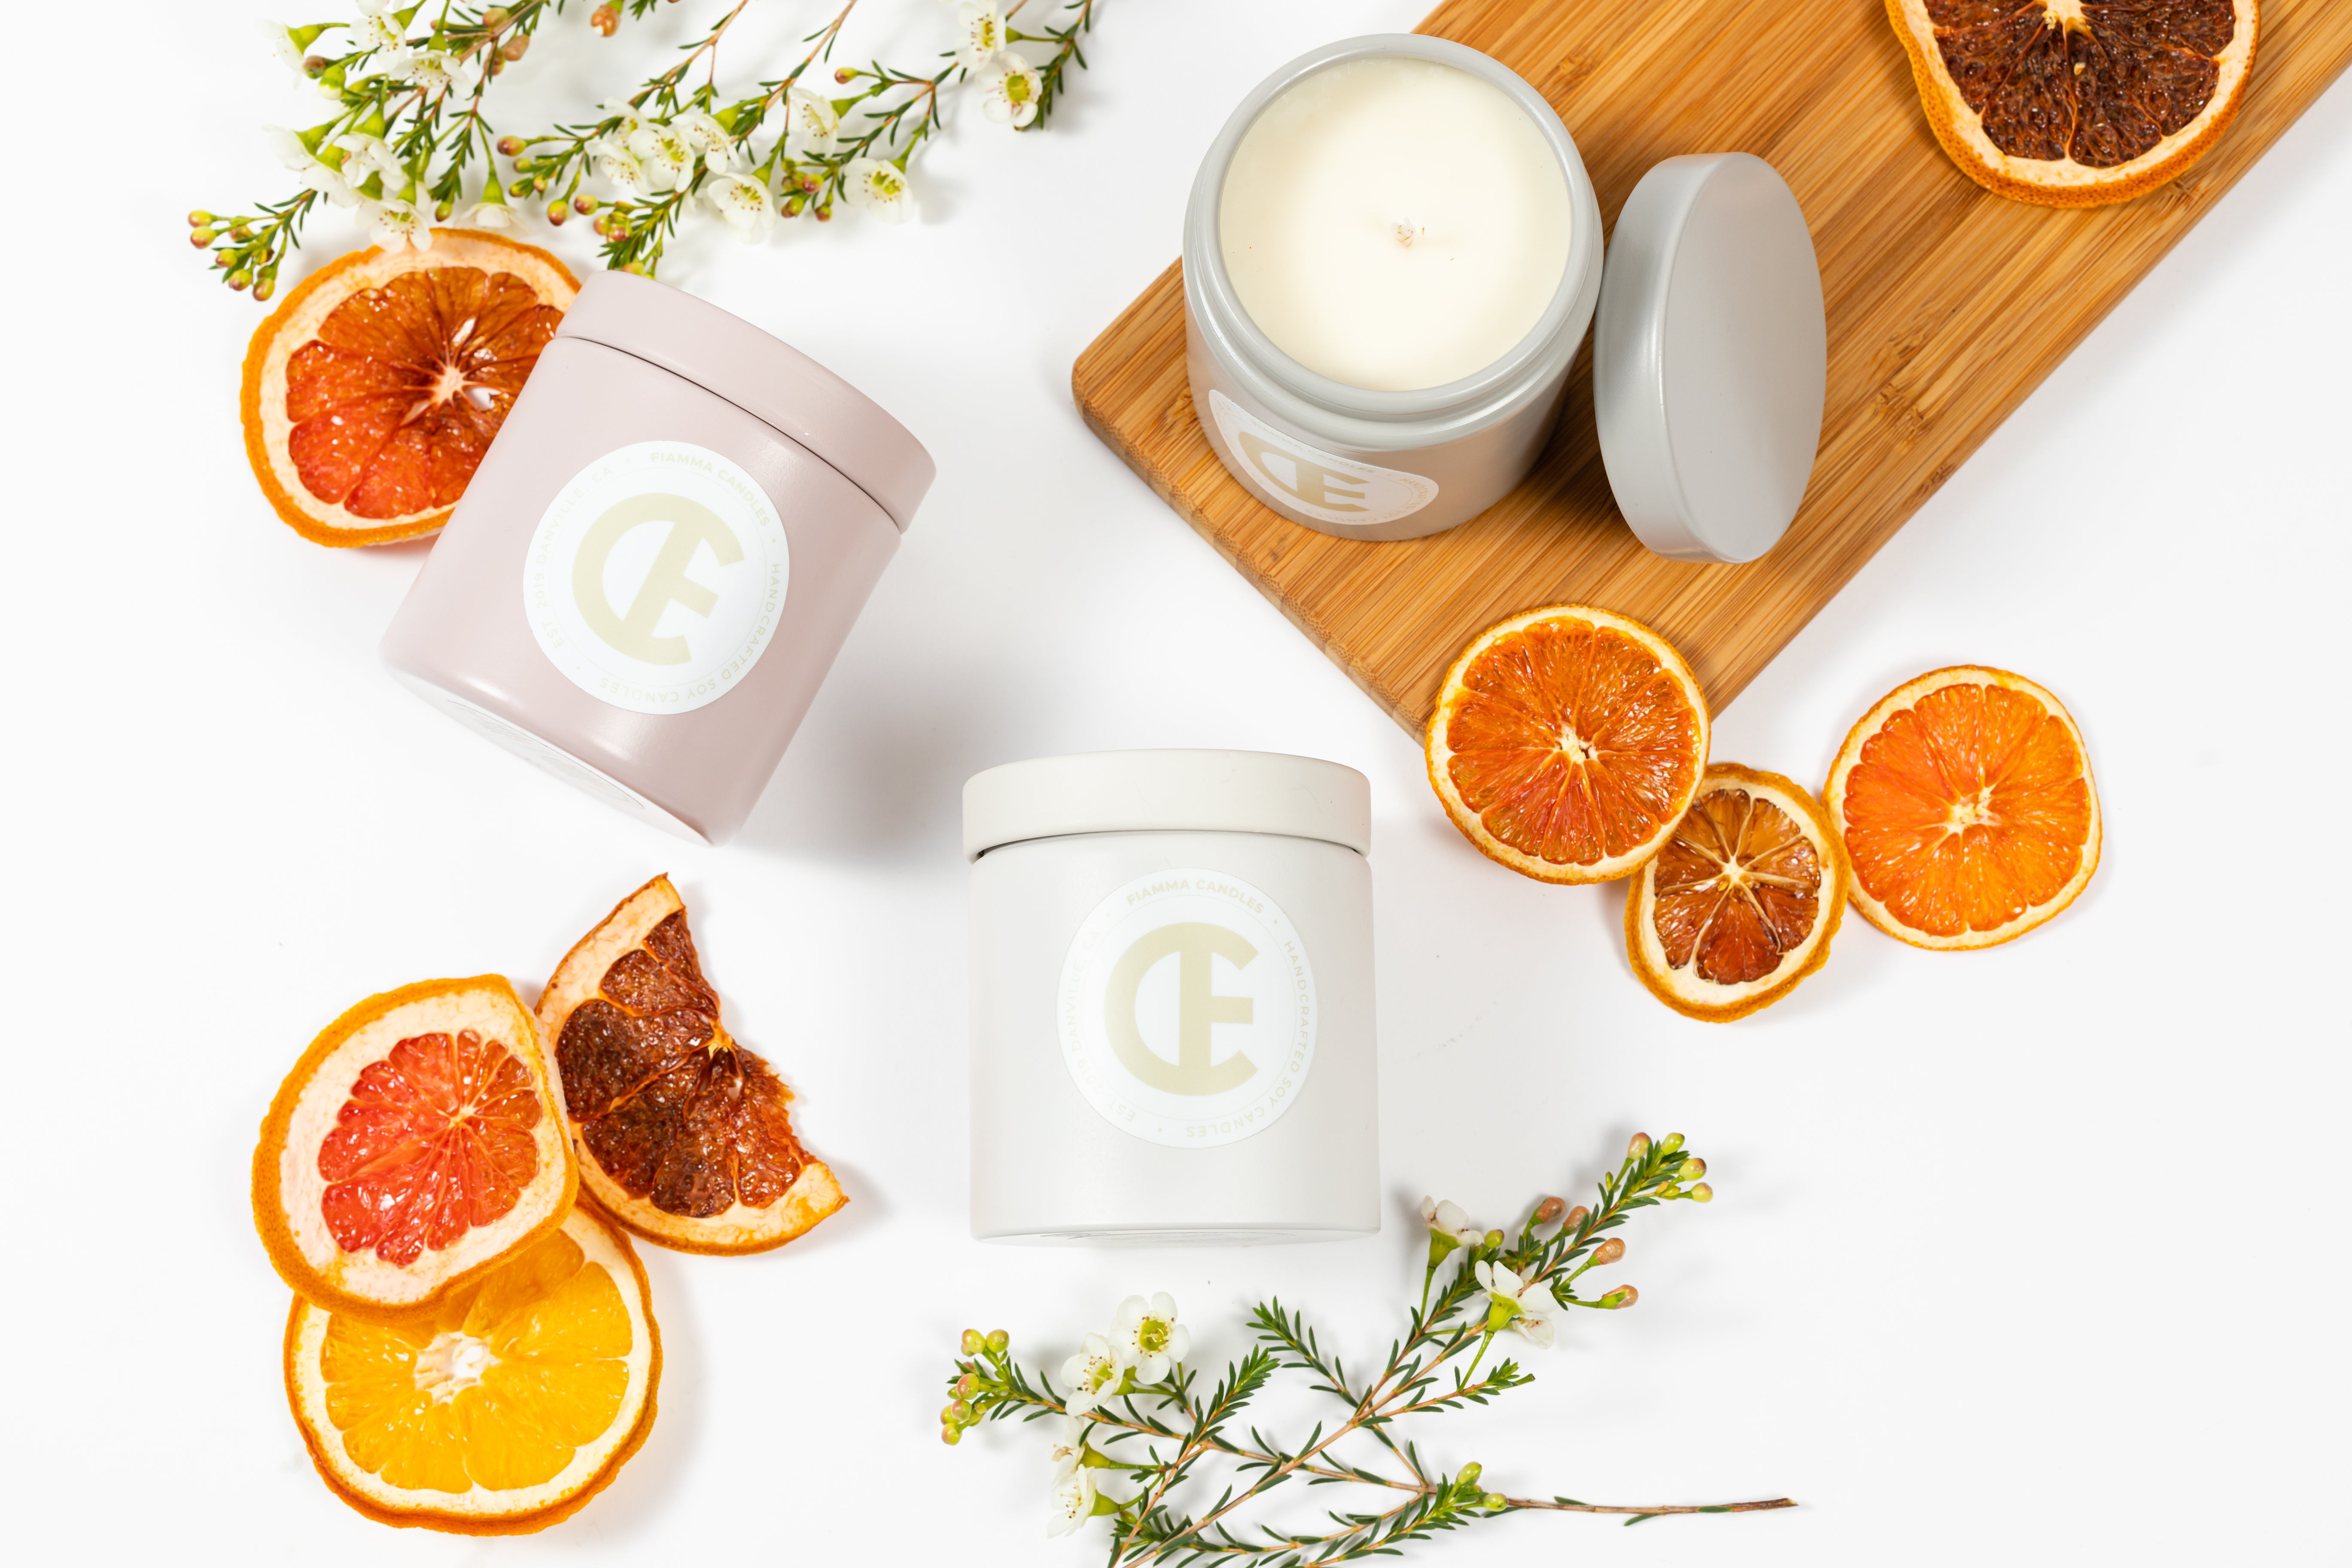 Luxury Soy Candles – Fiamma Candles